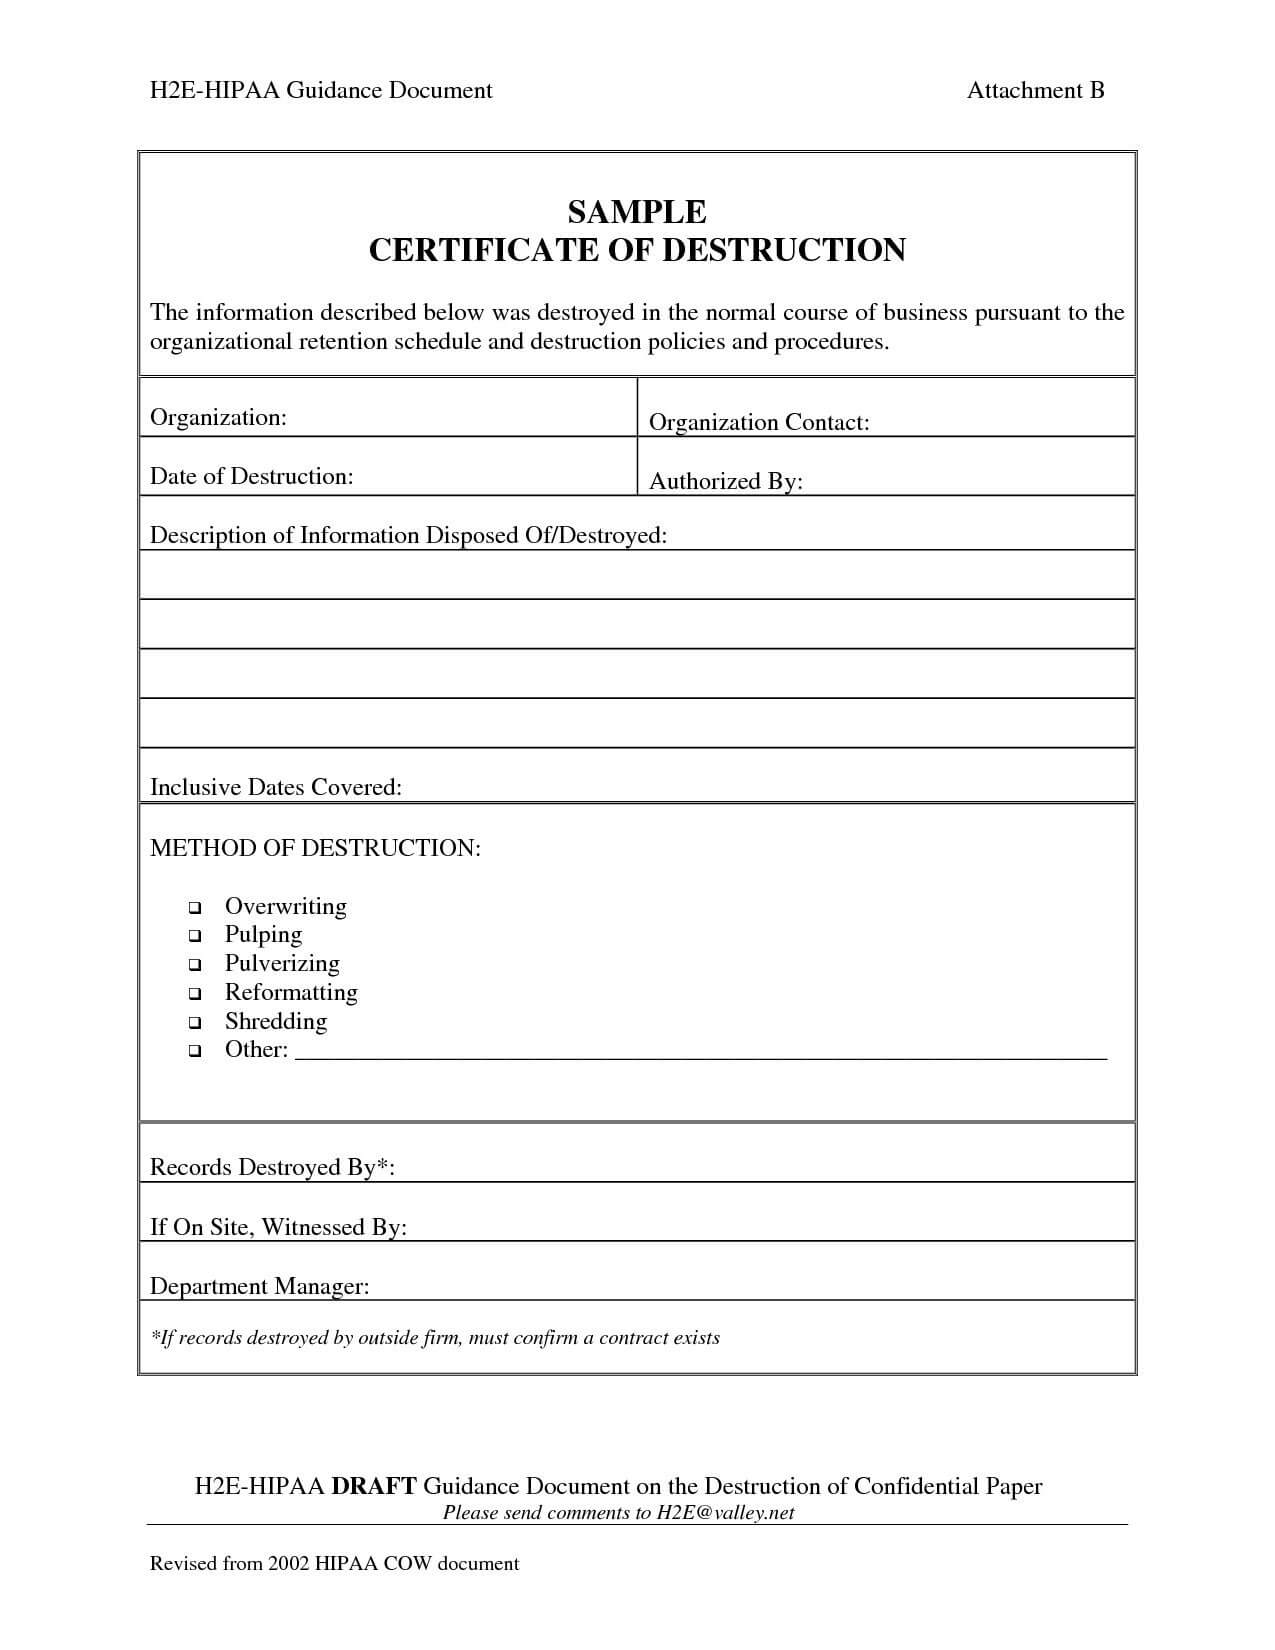 Exceptional Certificate Of Destruction Template Ideas Inside Certificate Of Disposal Template